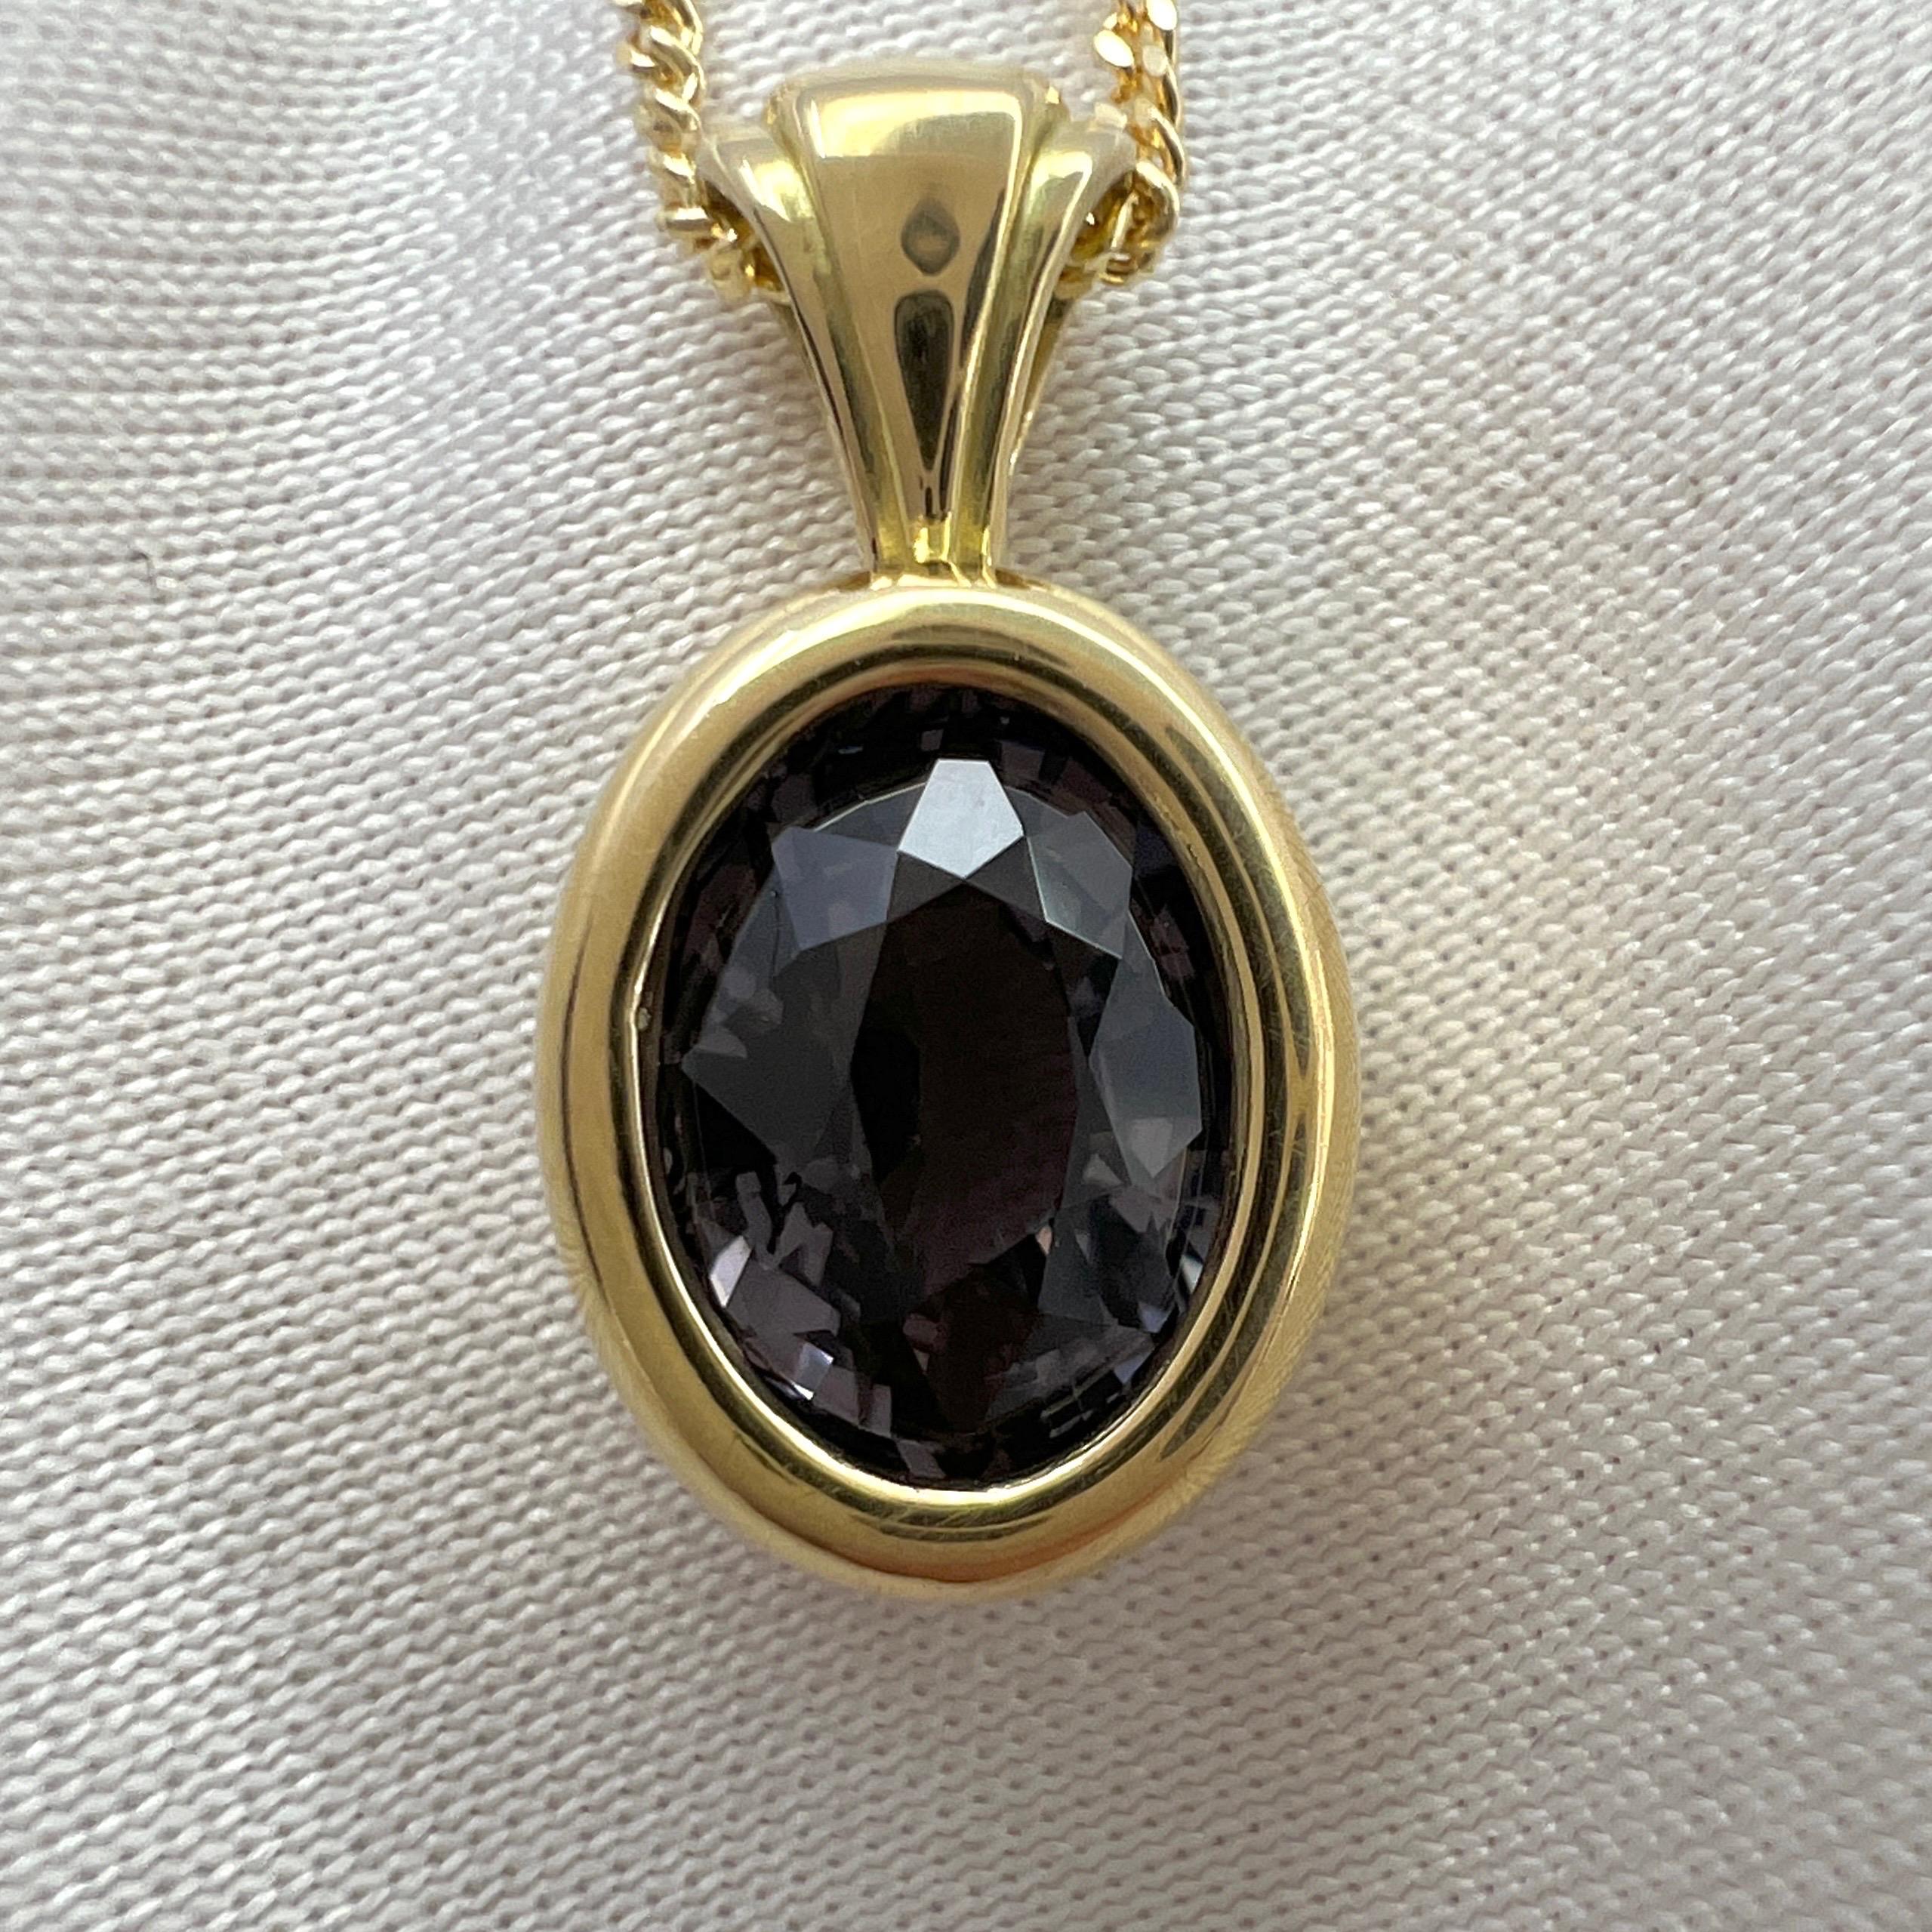 Rare Purple Gray Titanium Spinel Oval Cut 18k Yellow Gold Solitaire Pendant Necklace.

1.90 Carat spinel with a beautiful greyish blue purple colour. Often called titanium in the trade. This spinel has an excellent oval cut also with very good